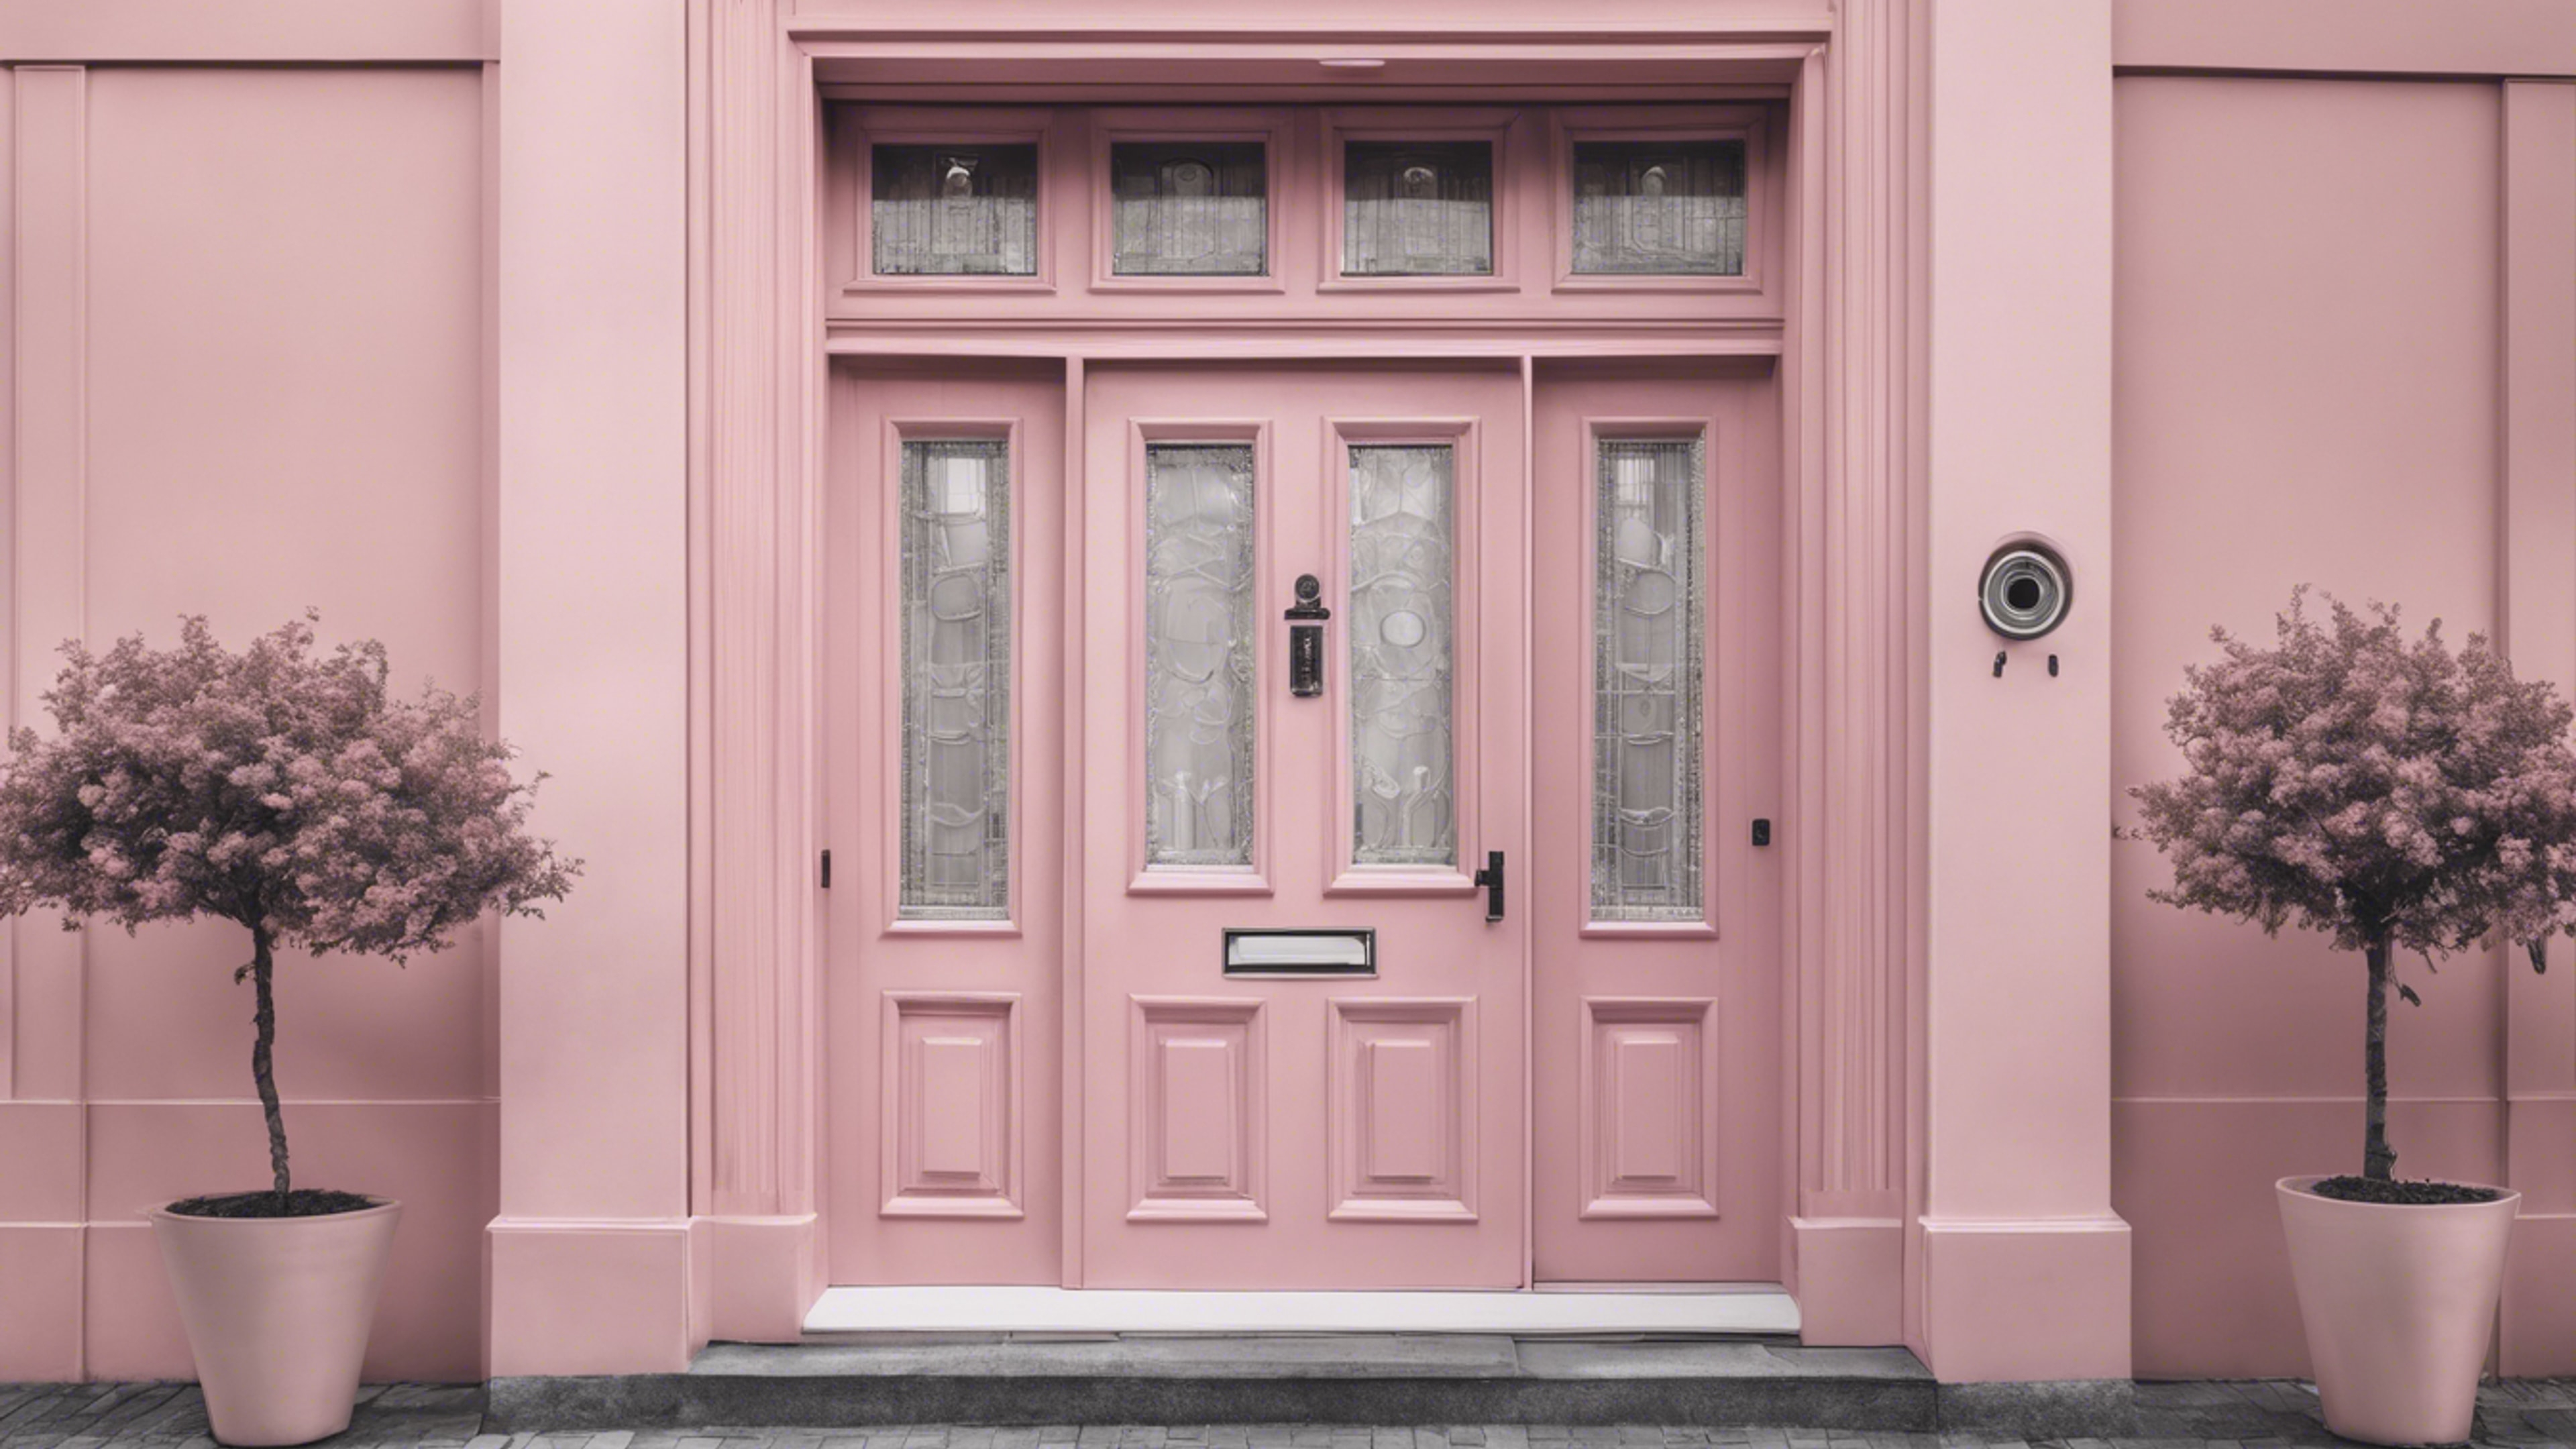 Monochrome image of a sophisticated townhouse door painted in a fetching preppy pastel pink. Tapet[a9cdce63c1c94c029691]